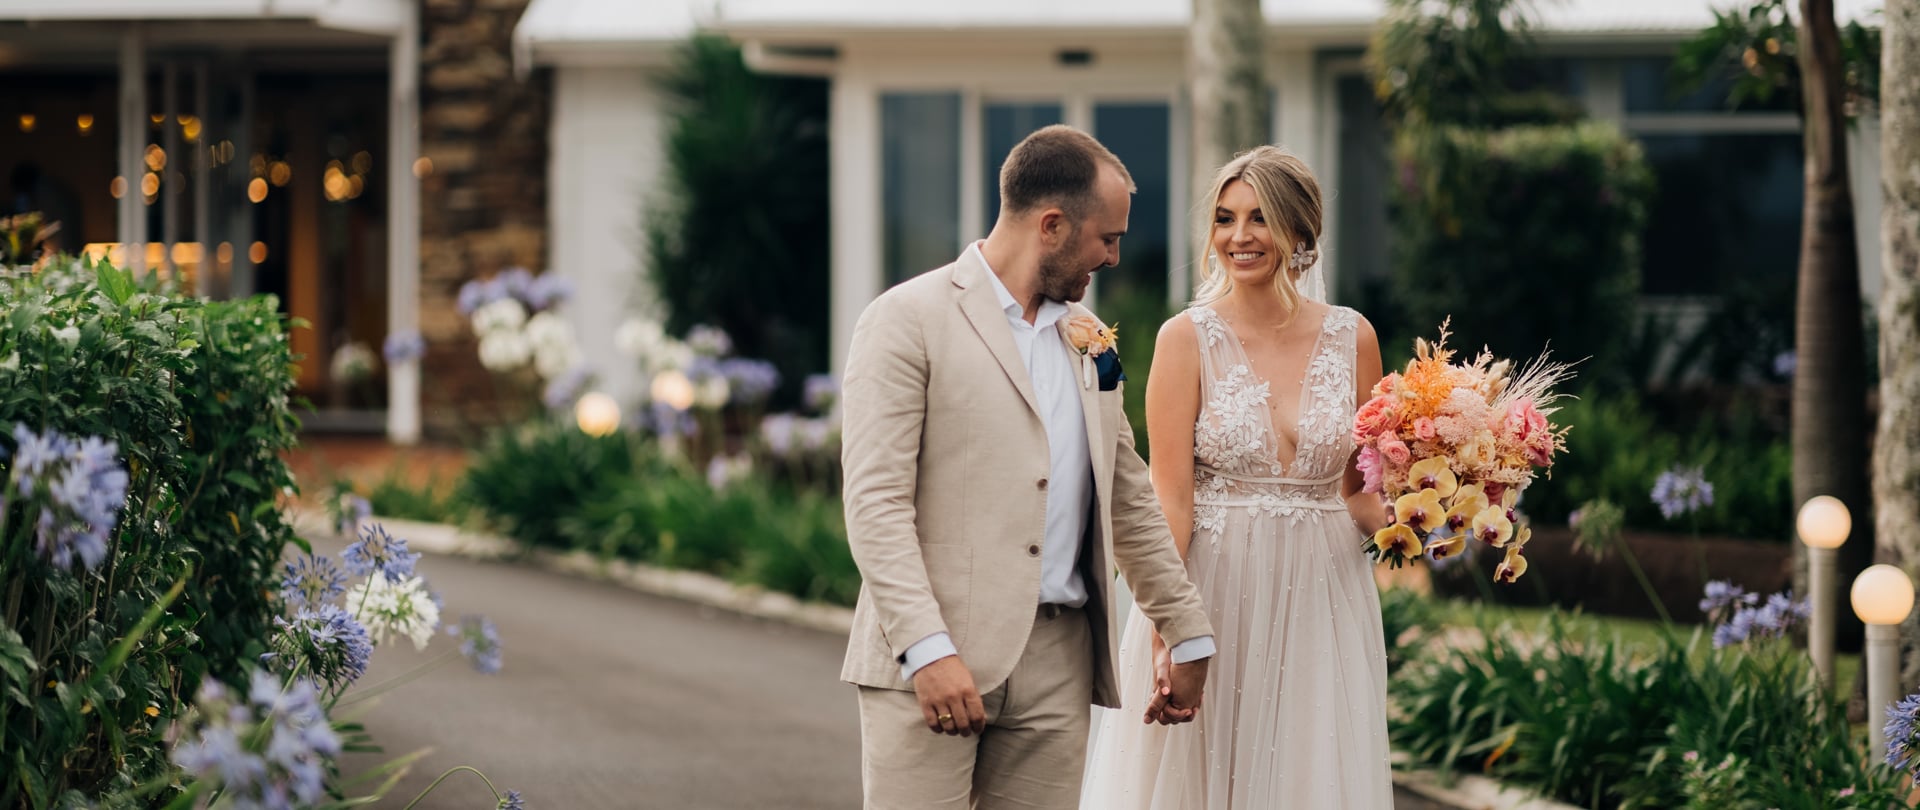 Lizzie & Ed Wedding Video Filmed at New South Wales, Australia